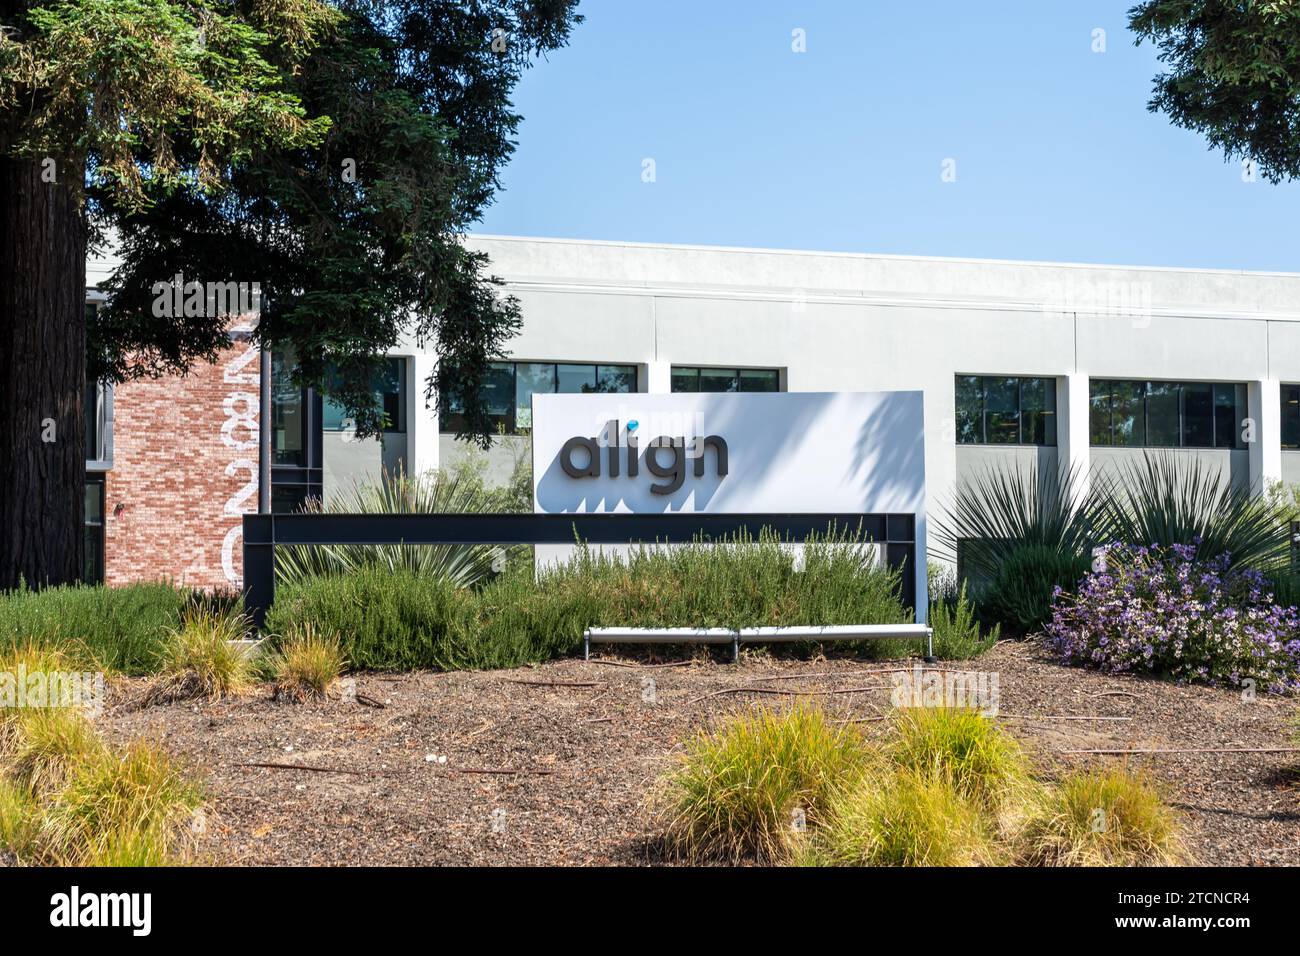 Alignment Technology Worldwide Offices in Silicon Valley, San Jose, California, USA Foto Stock